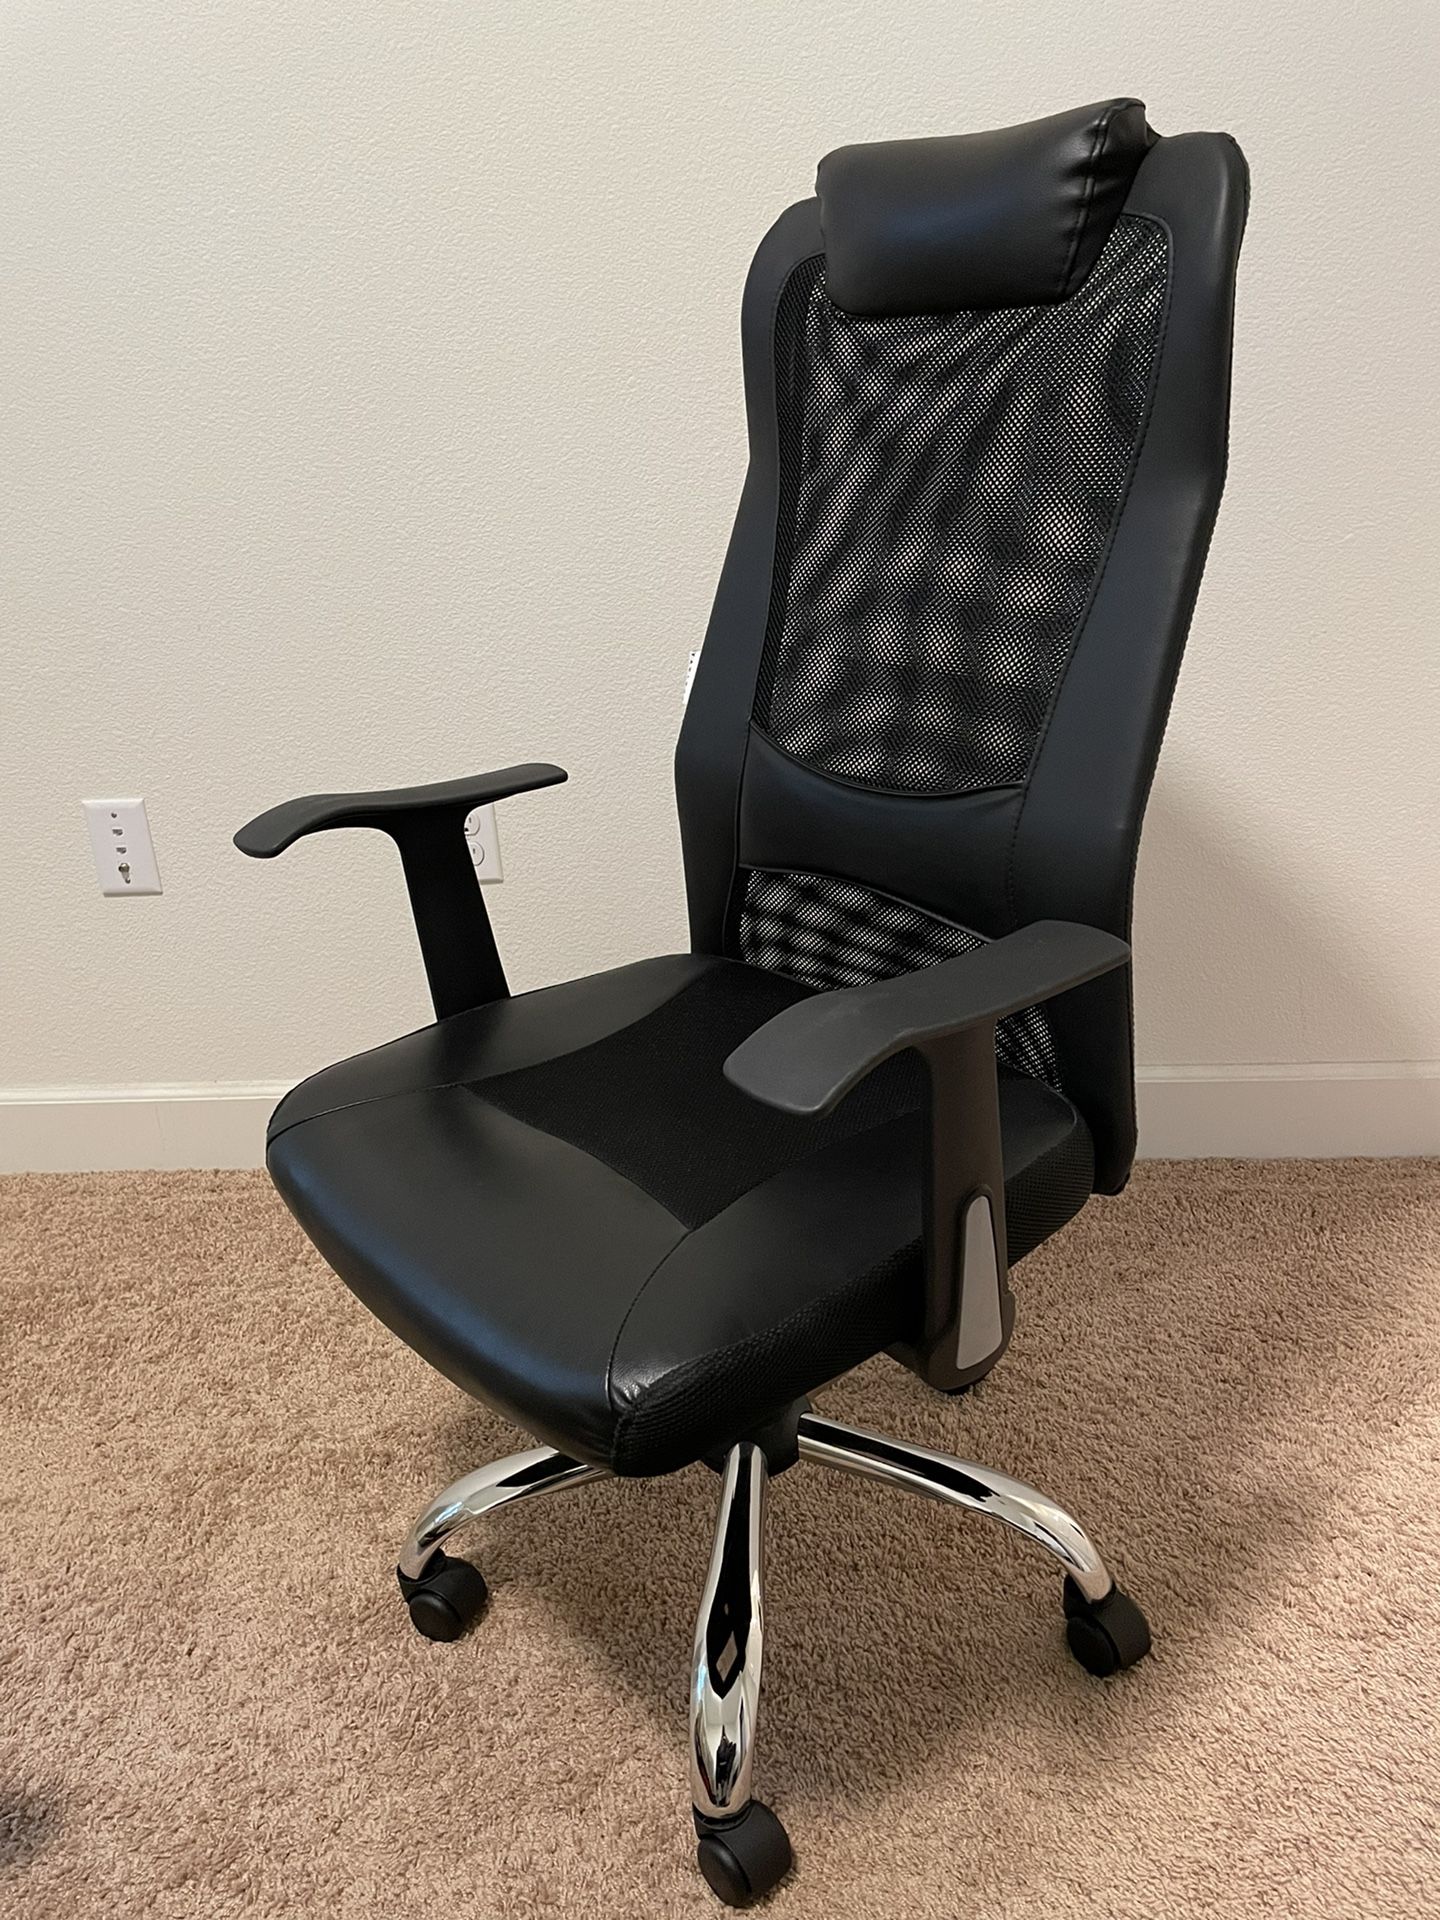 Ergonomic Chair With Padded Leather Headrest And Seat